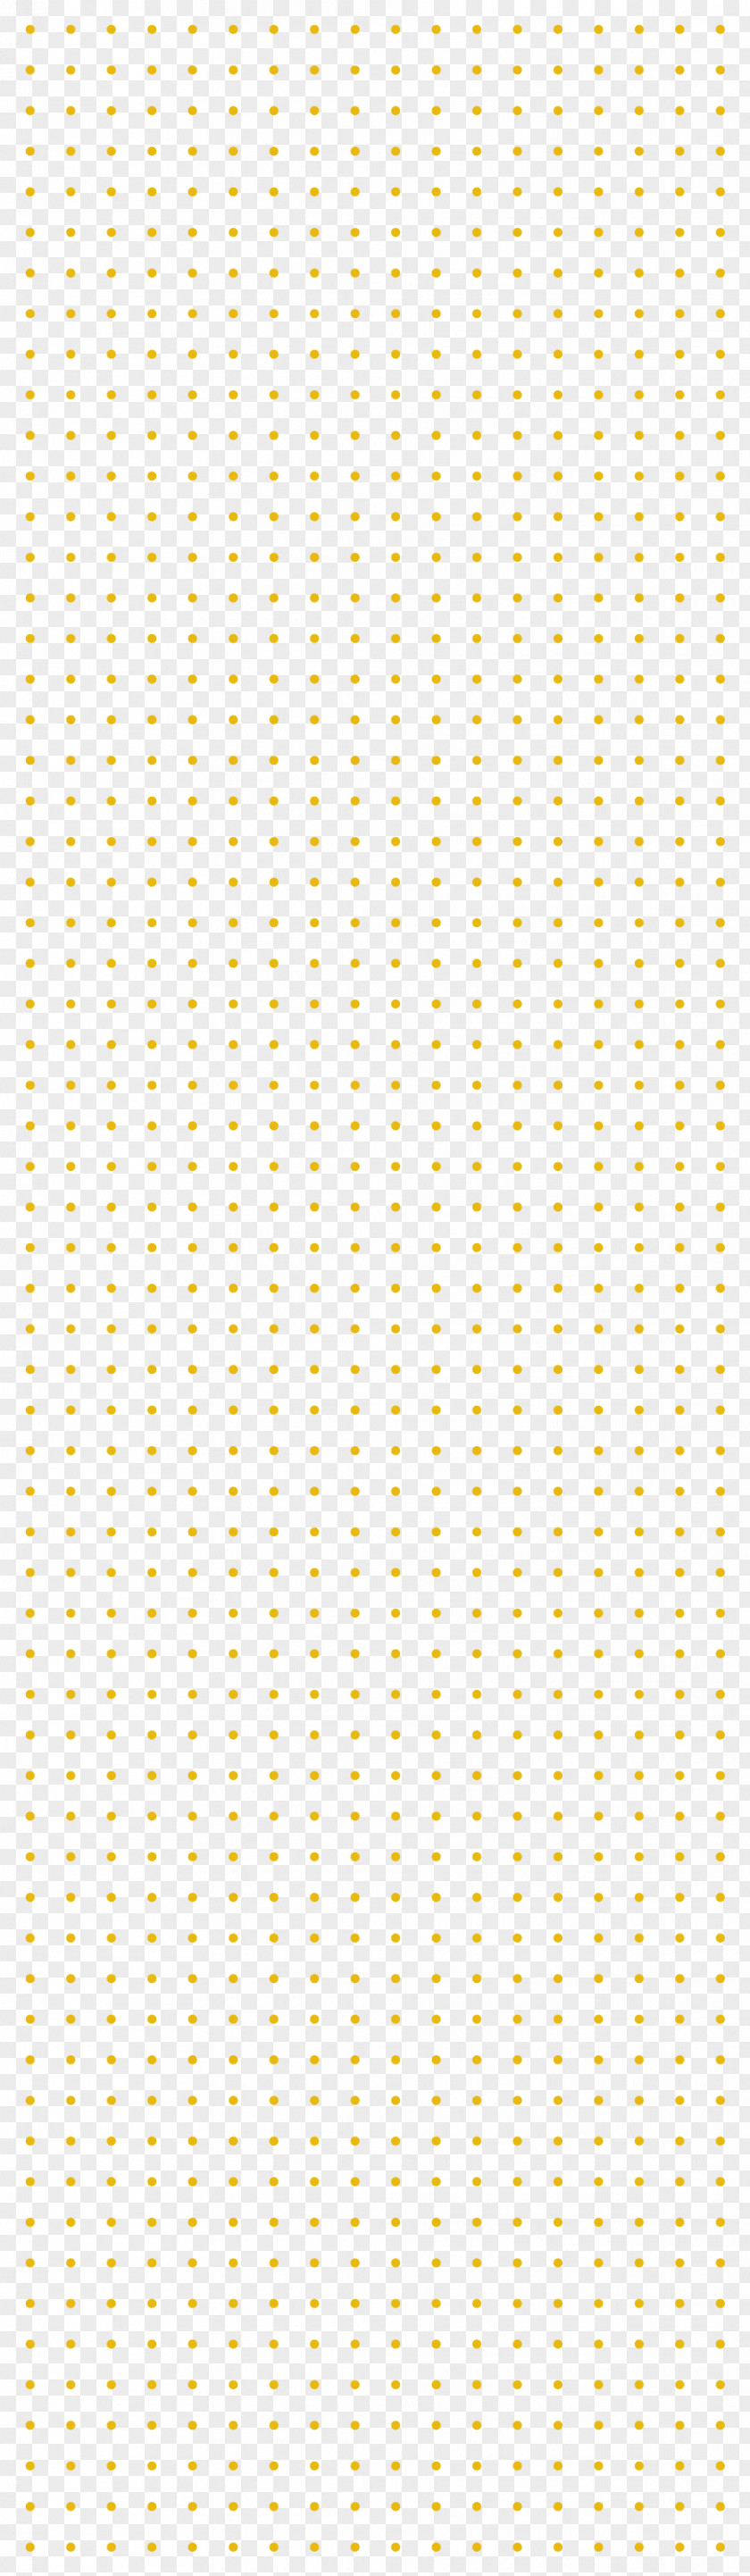 GOLD DOTS Area Rectangle Pattern PNG